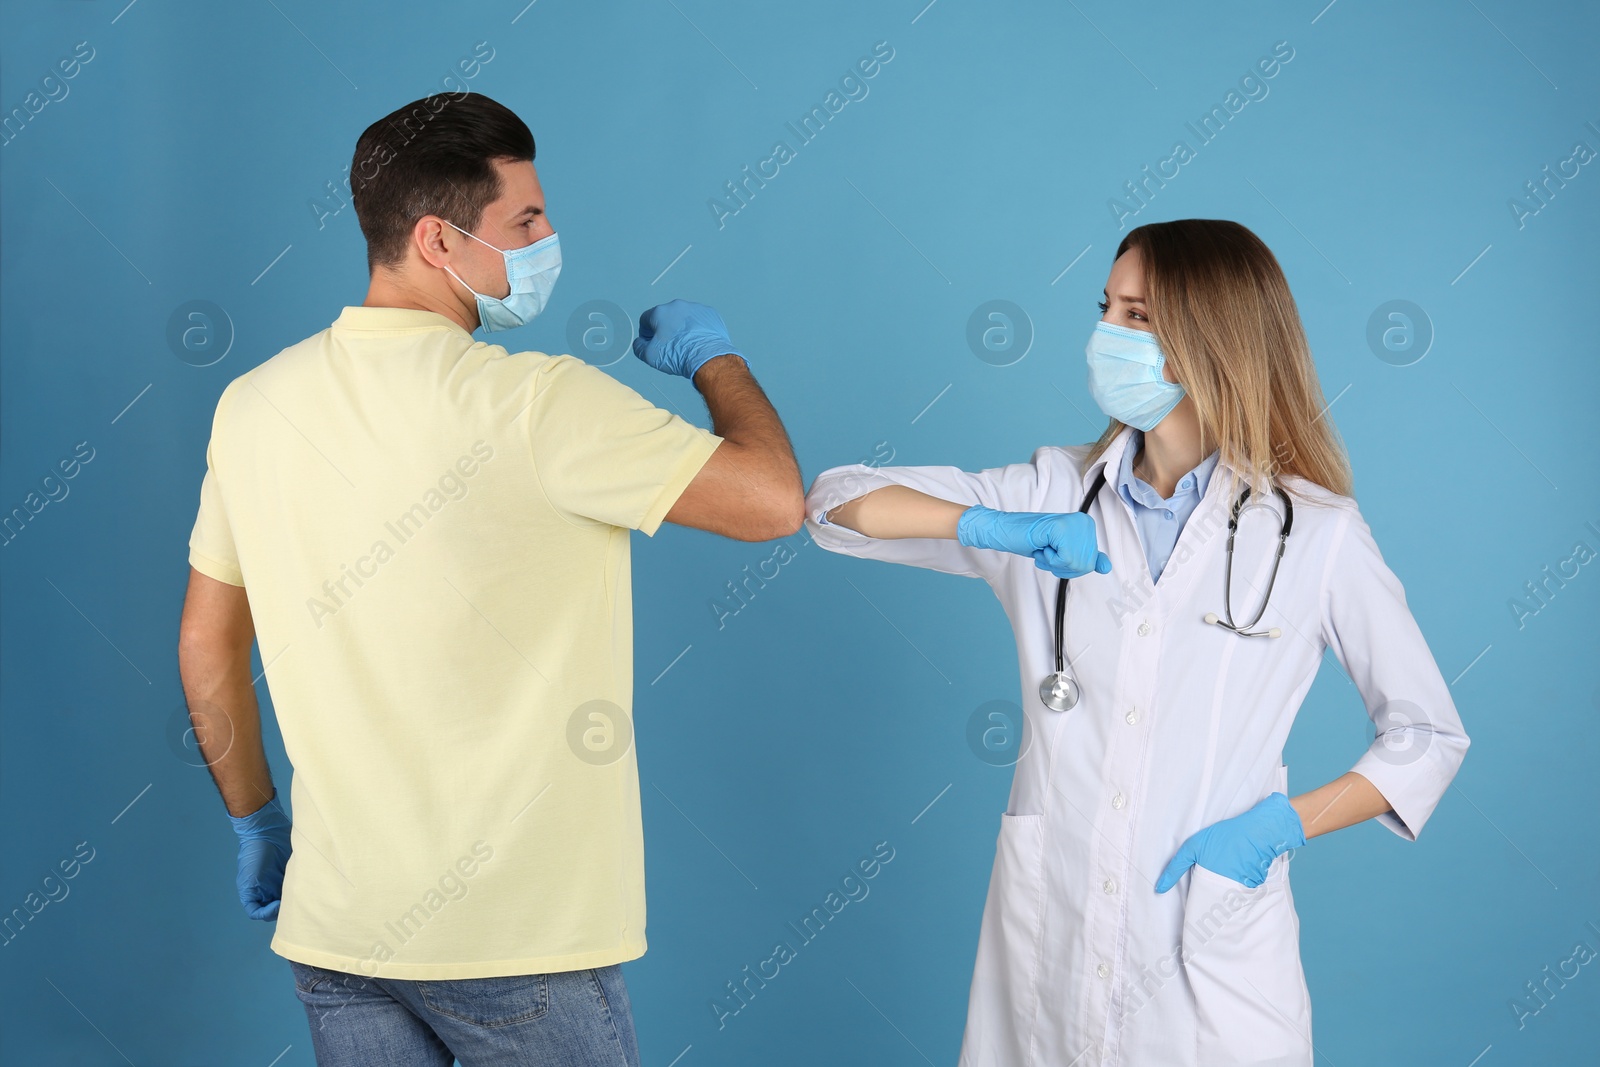 Photo of Doctor and patient doing elbow bump instead of handshake on light blue background. New greeting during COVID-19 pandemic